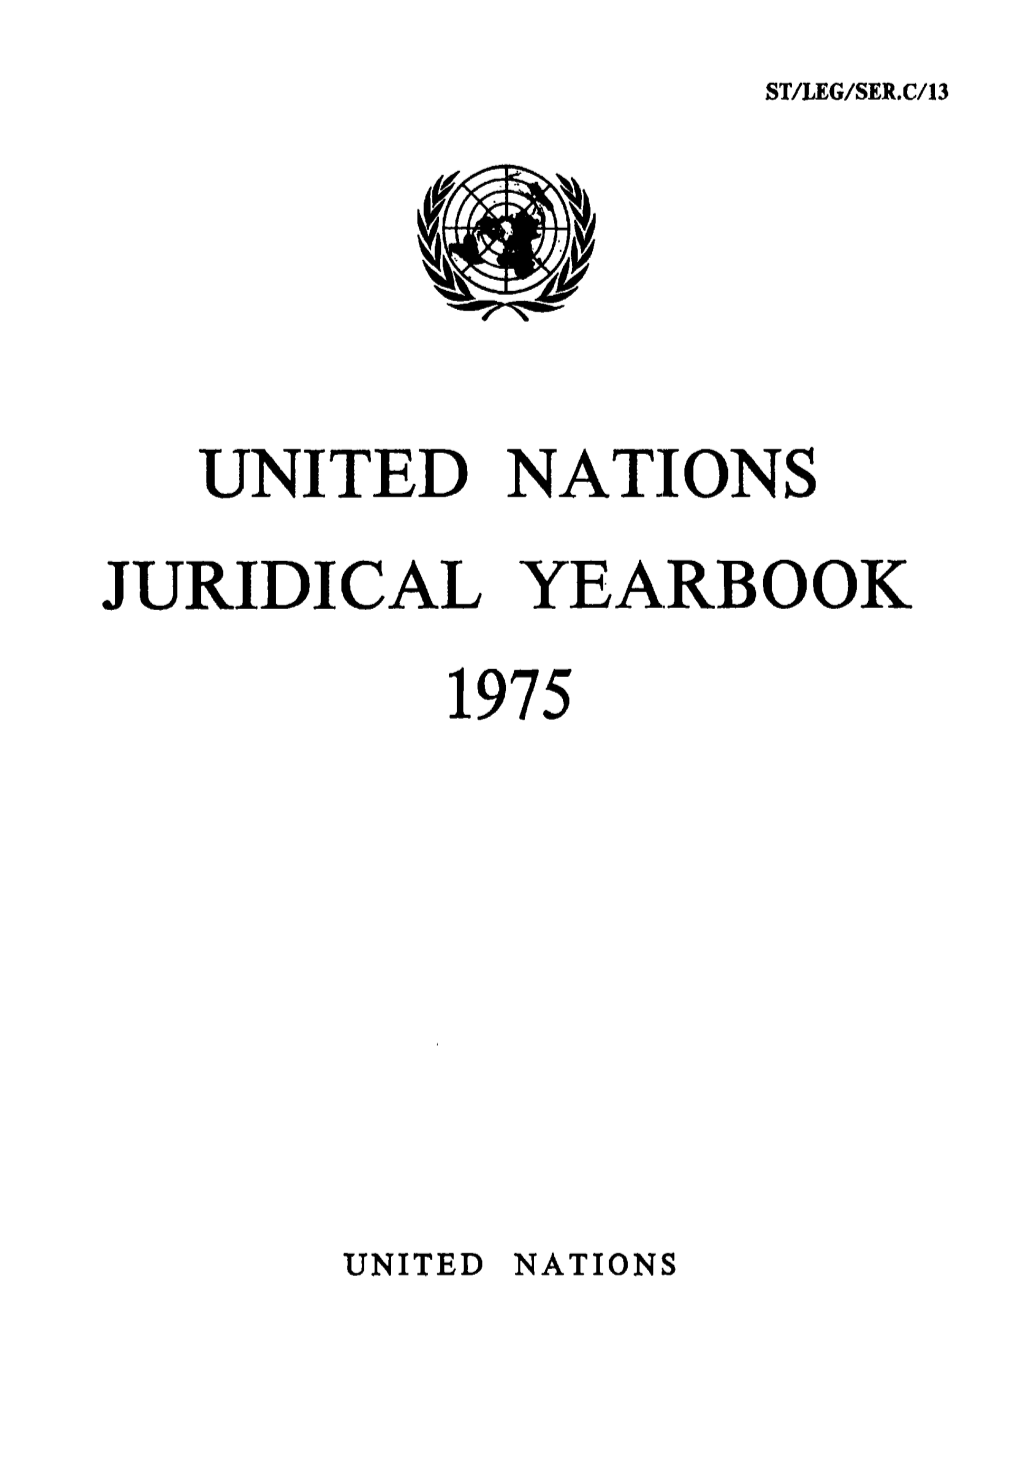 United Nations Juridical Yearbook 1975